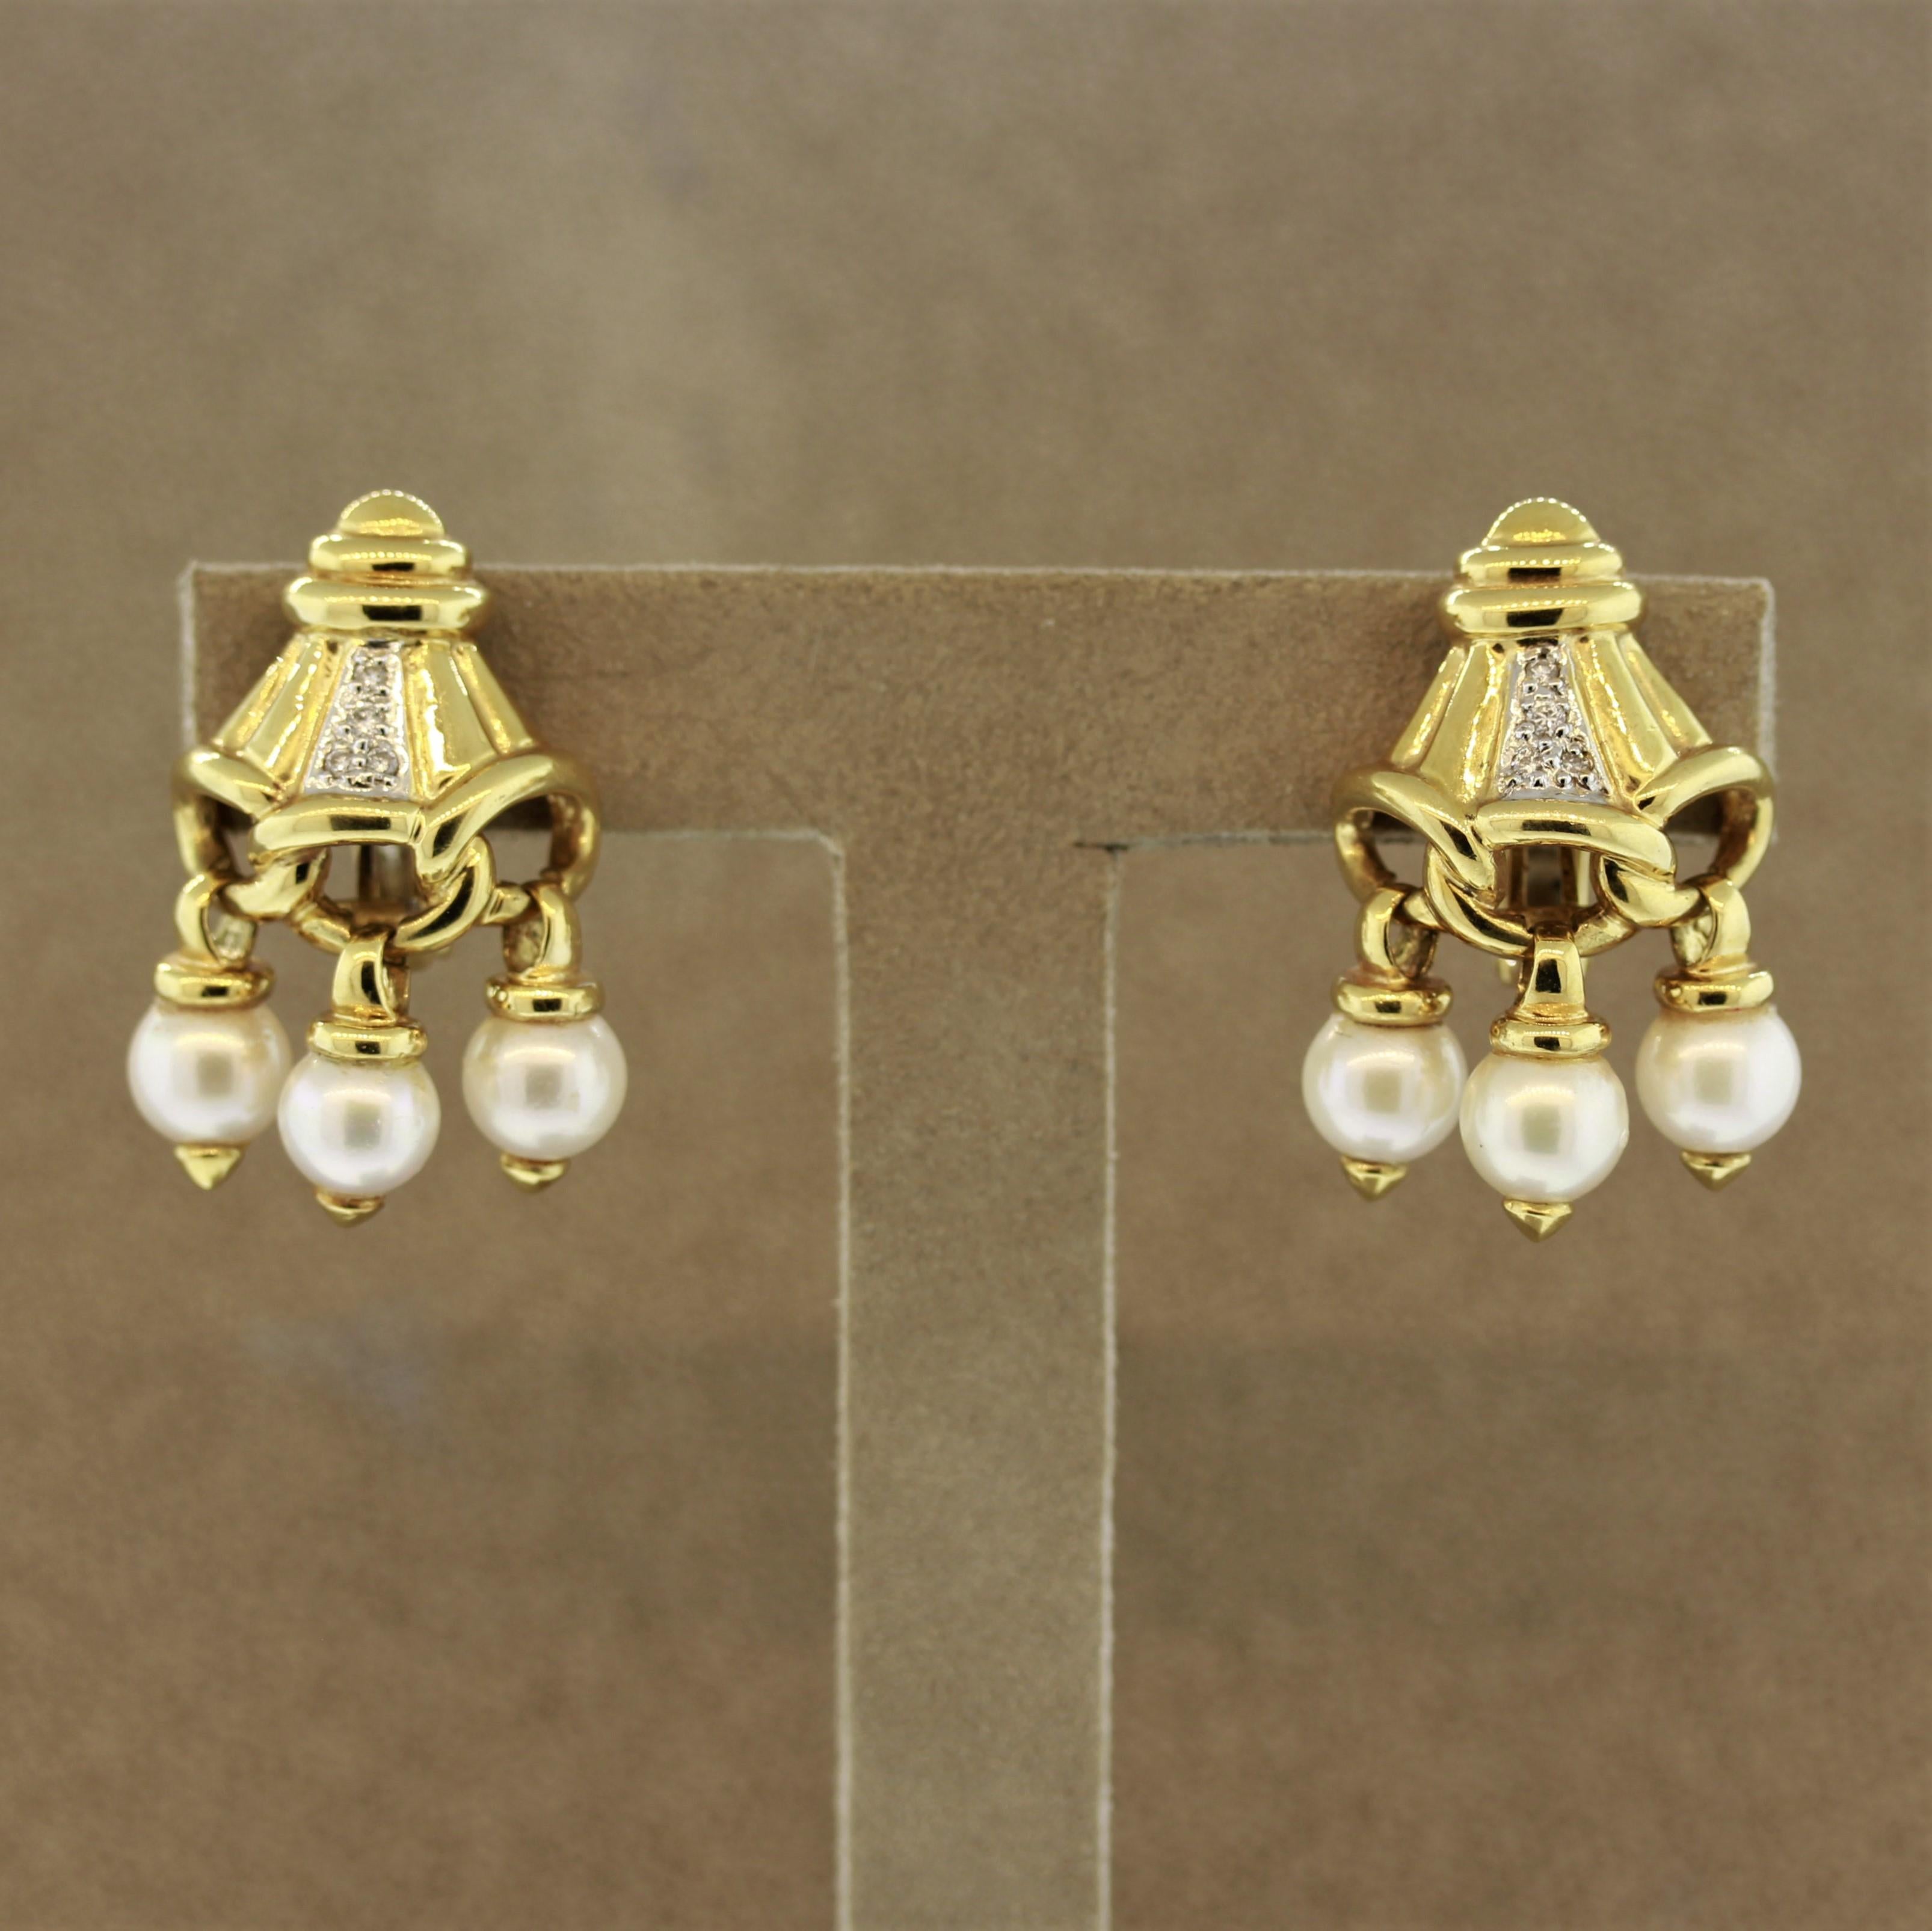 A unique pair of earrings made in 18k yellow gold. They feature 0.10 carats of round brilliant cut diamonds along with 6 freshwater pearls which are tasseled from the bottom of the earrings.

Length: 1.2 inches